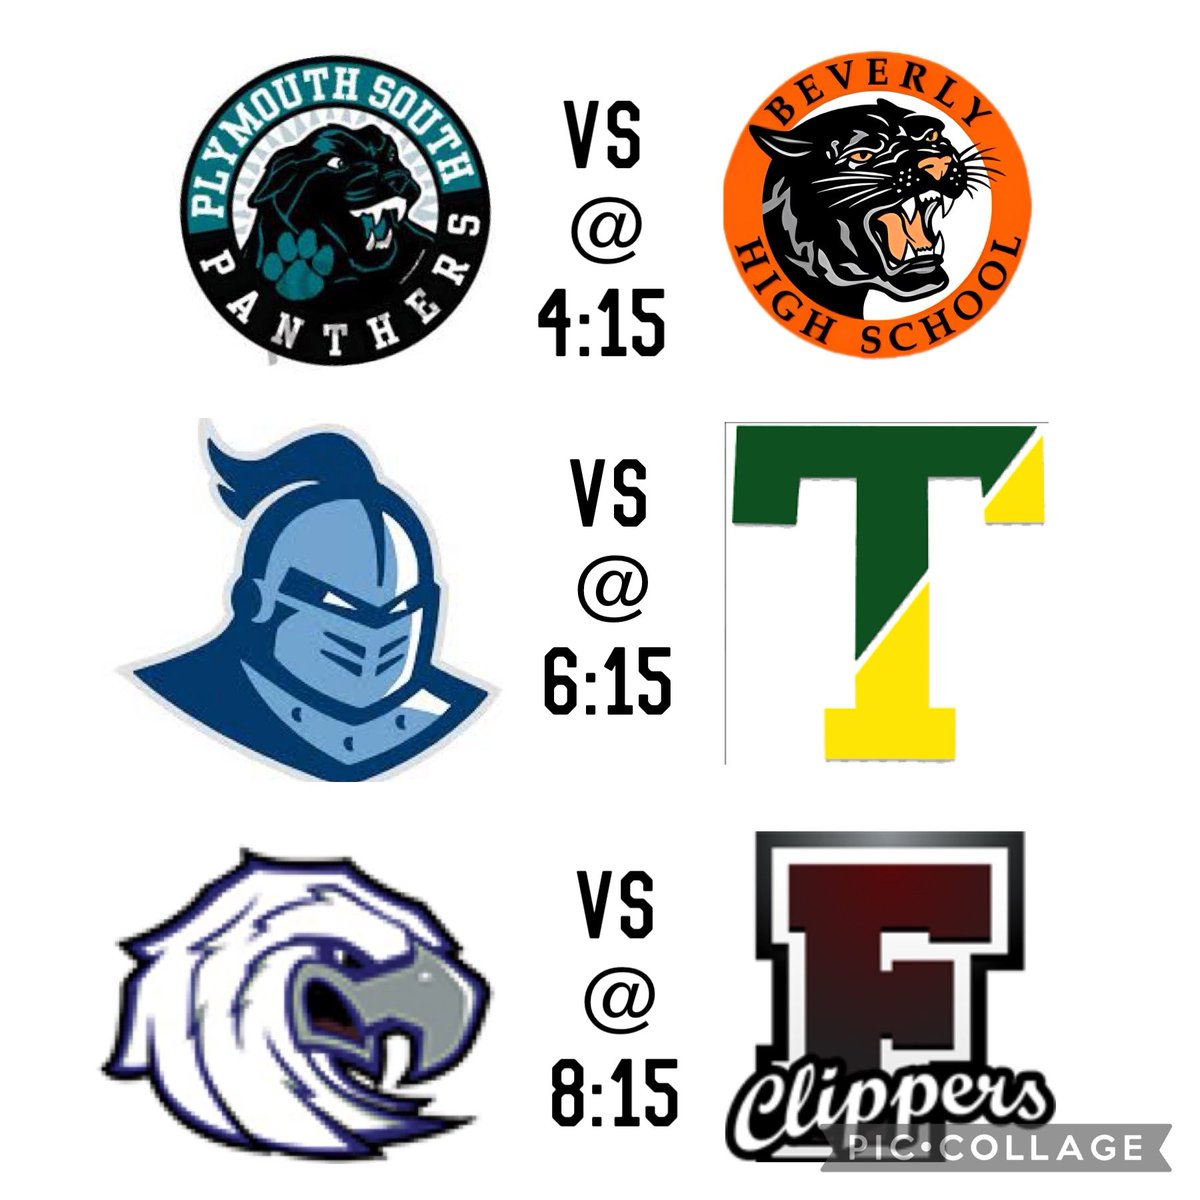 TONIGHT’S LINE-UP @ Gallo! 
D2G (Plymouth N/S v Beverly)
D4B (Sandwich v Taconic) 
D2B (Plymouth No v Falmouth)
#Round32 #TourneyTime